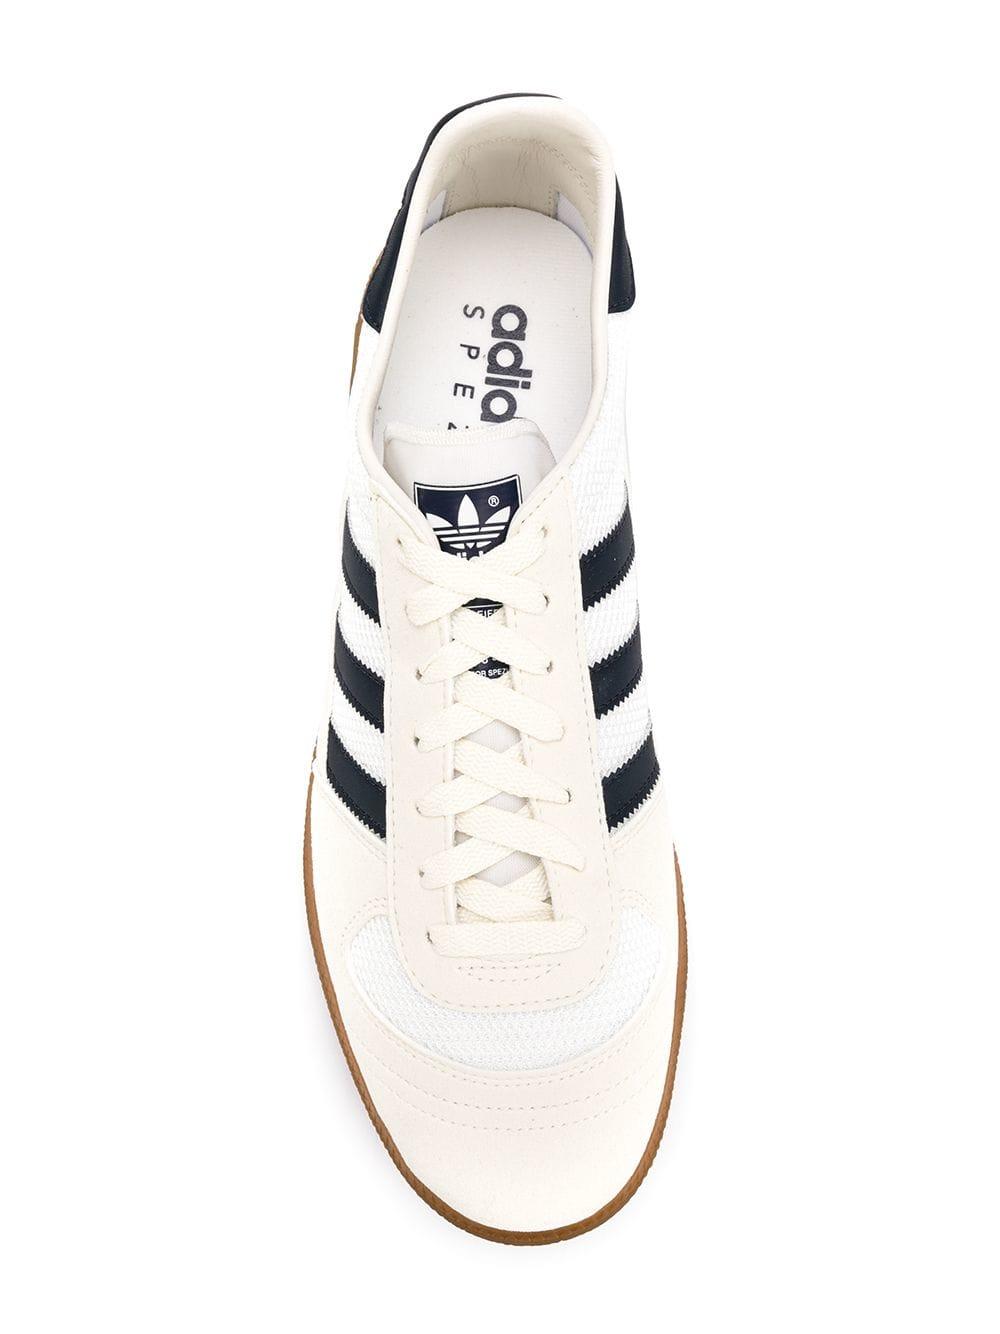 adidas Leather Wilsy Spezial Trainers in White for Men - Lyst